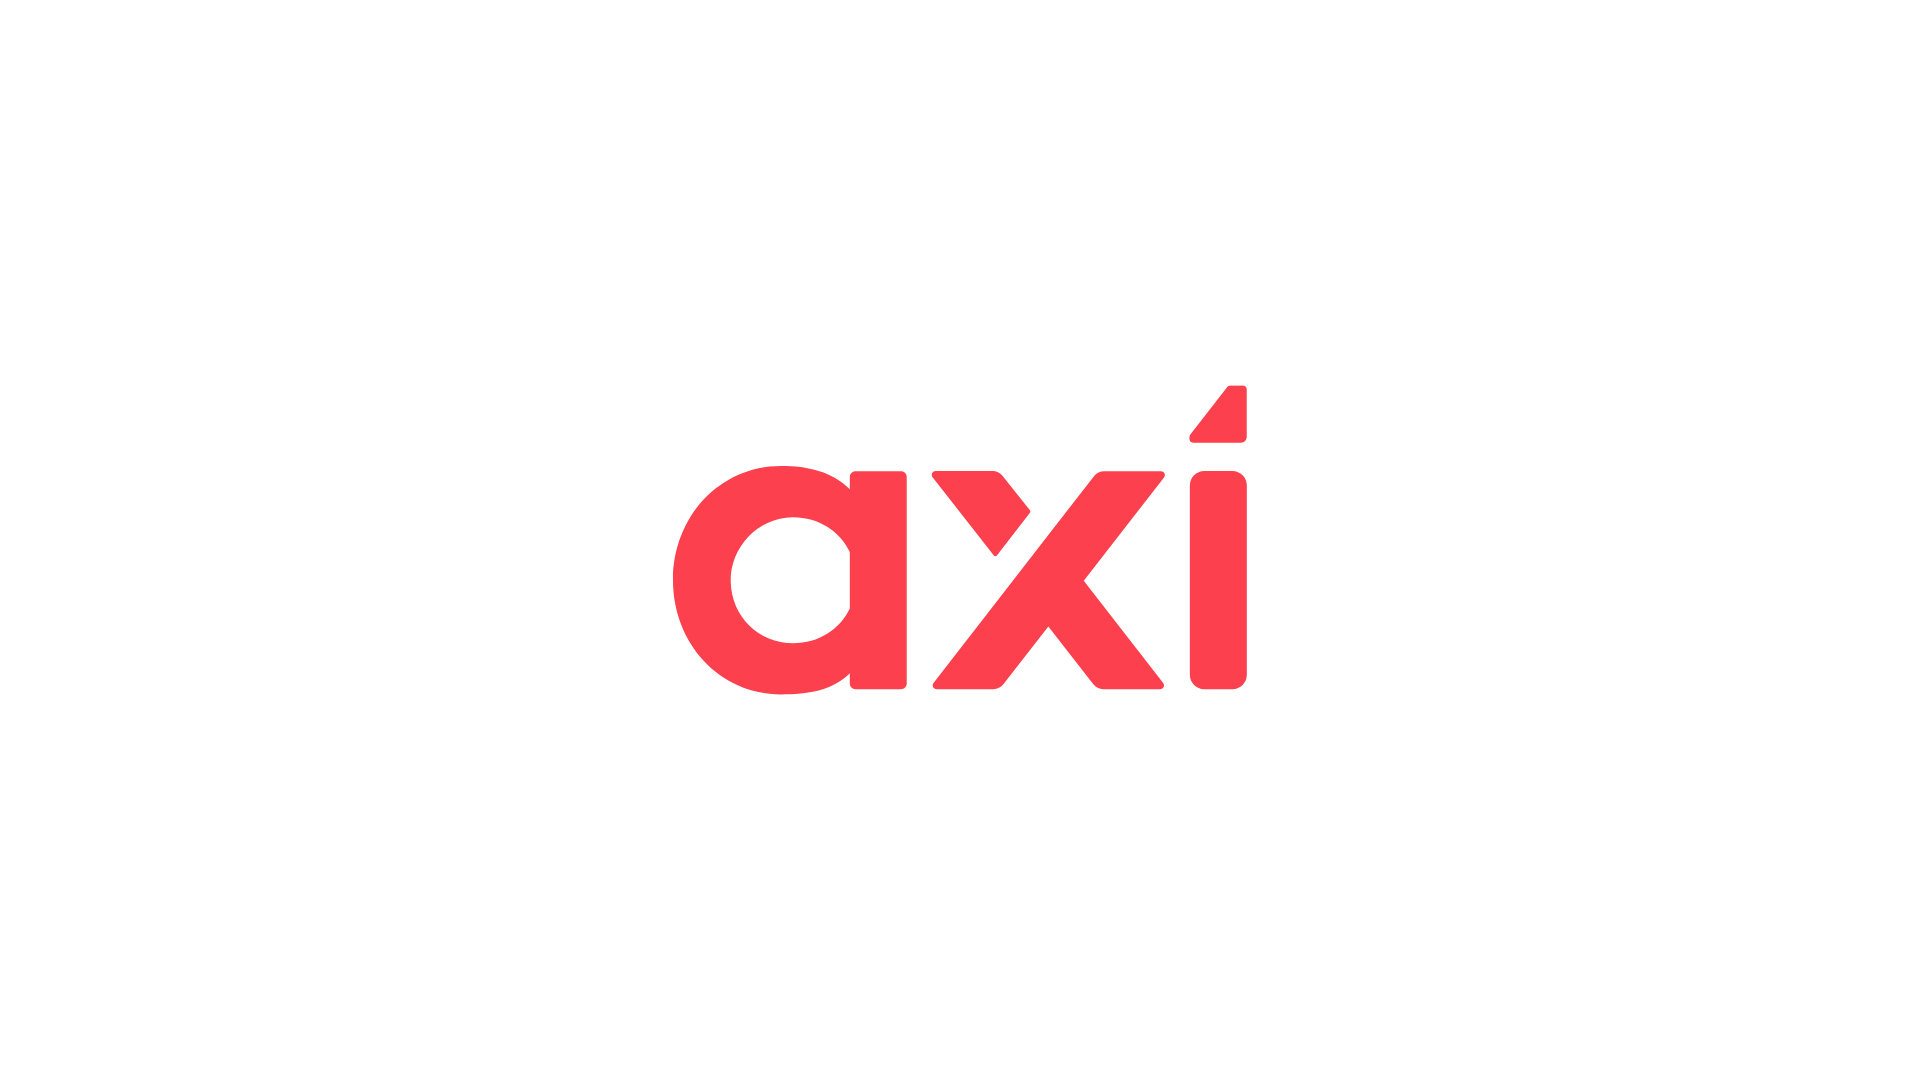 axi アクシ　アキシ